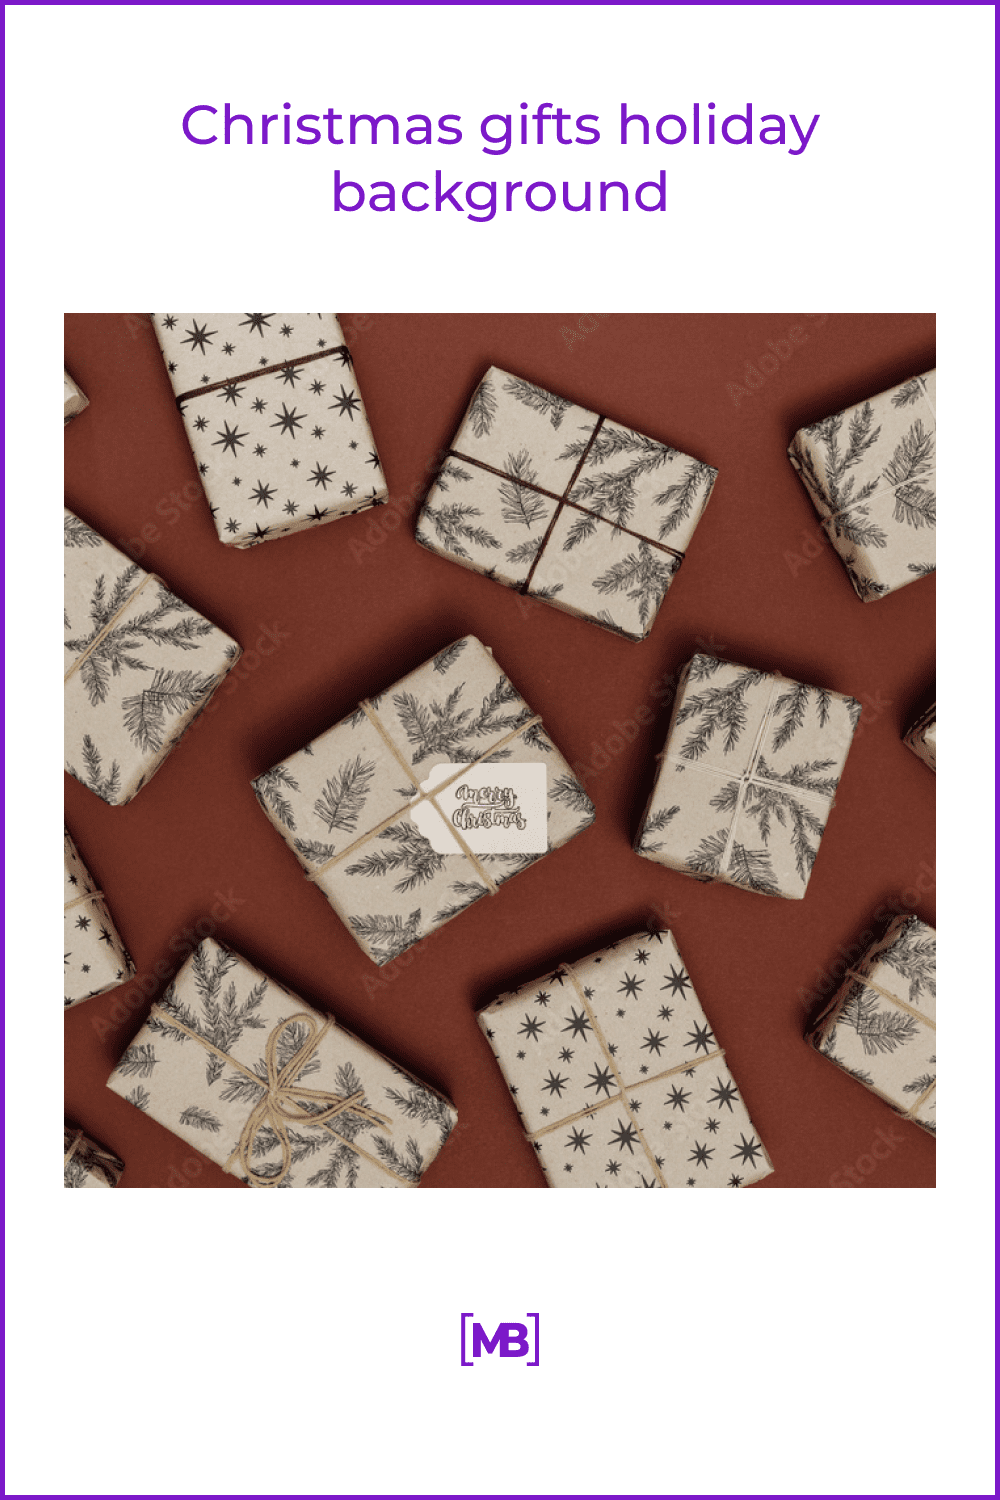 gifts wrapped in paper with sprigs and stars on a light brown background.